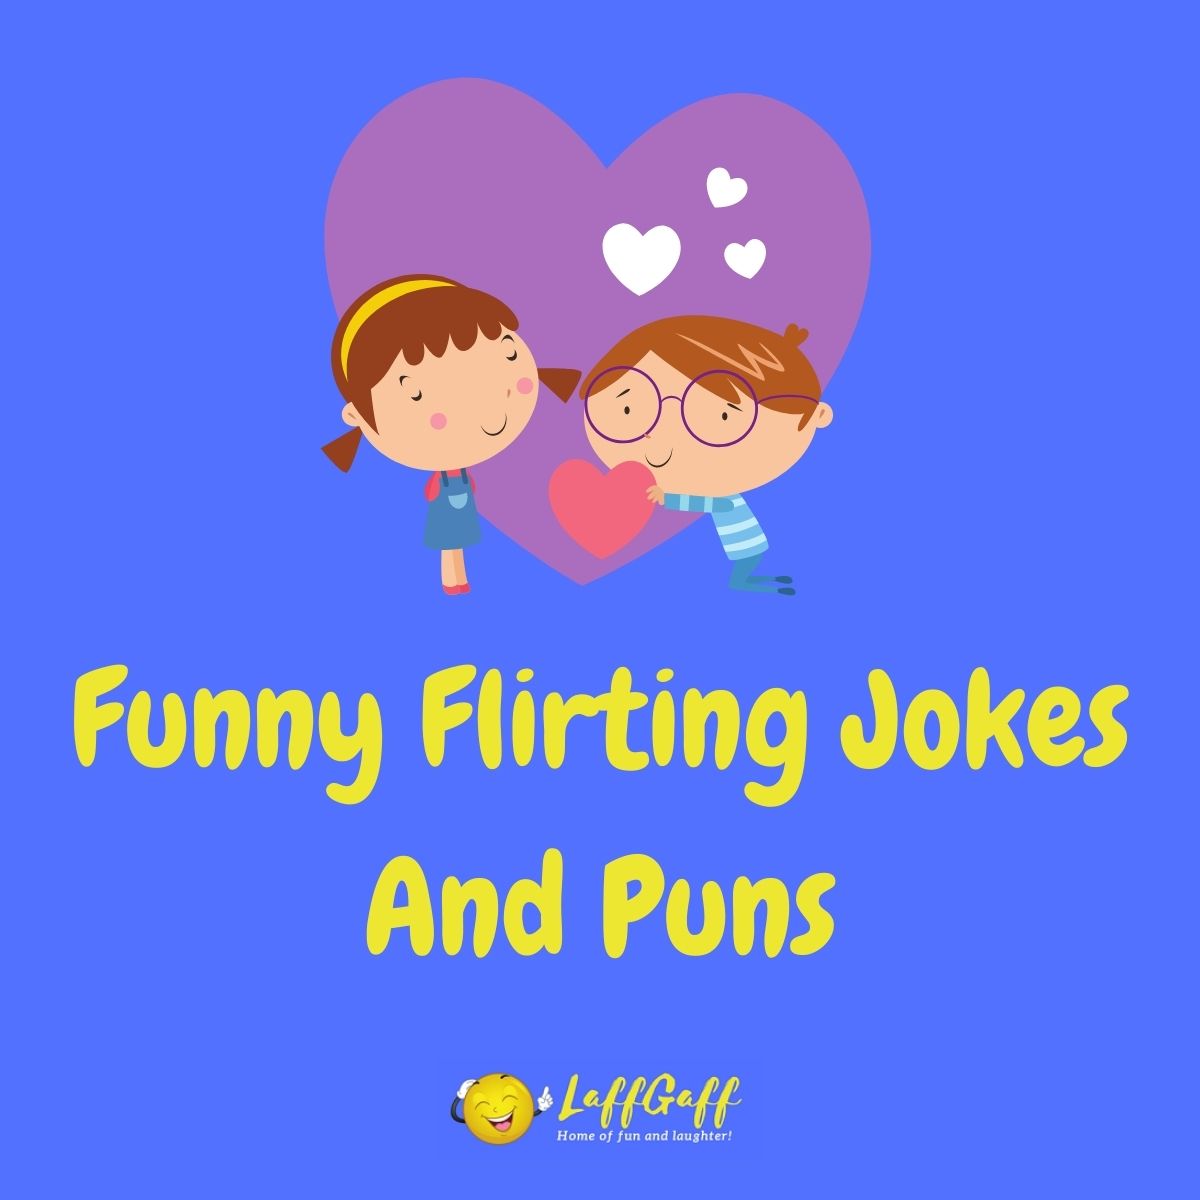 Featured image for a page of funny flirting jokes and puns.